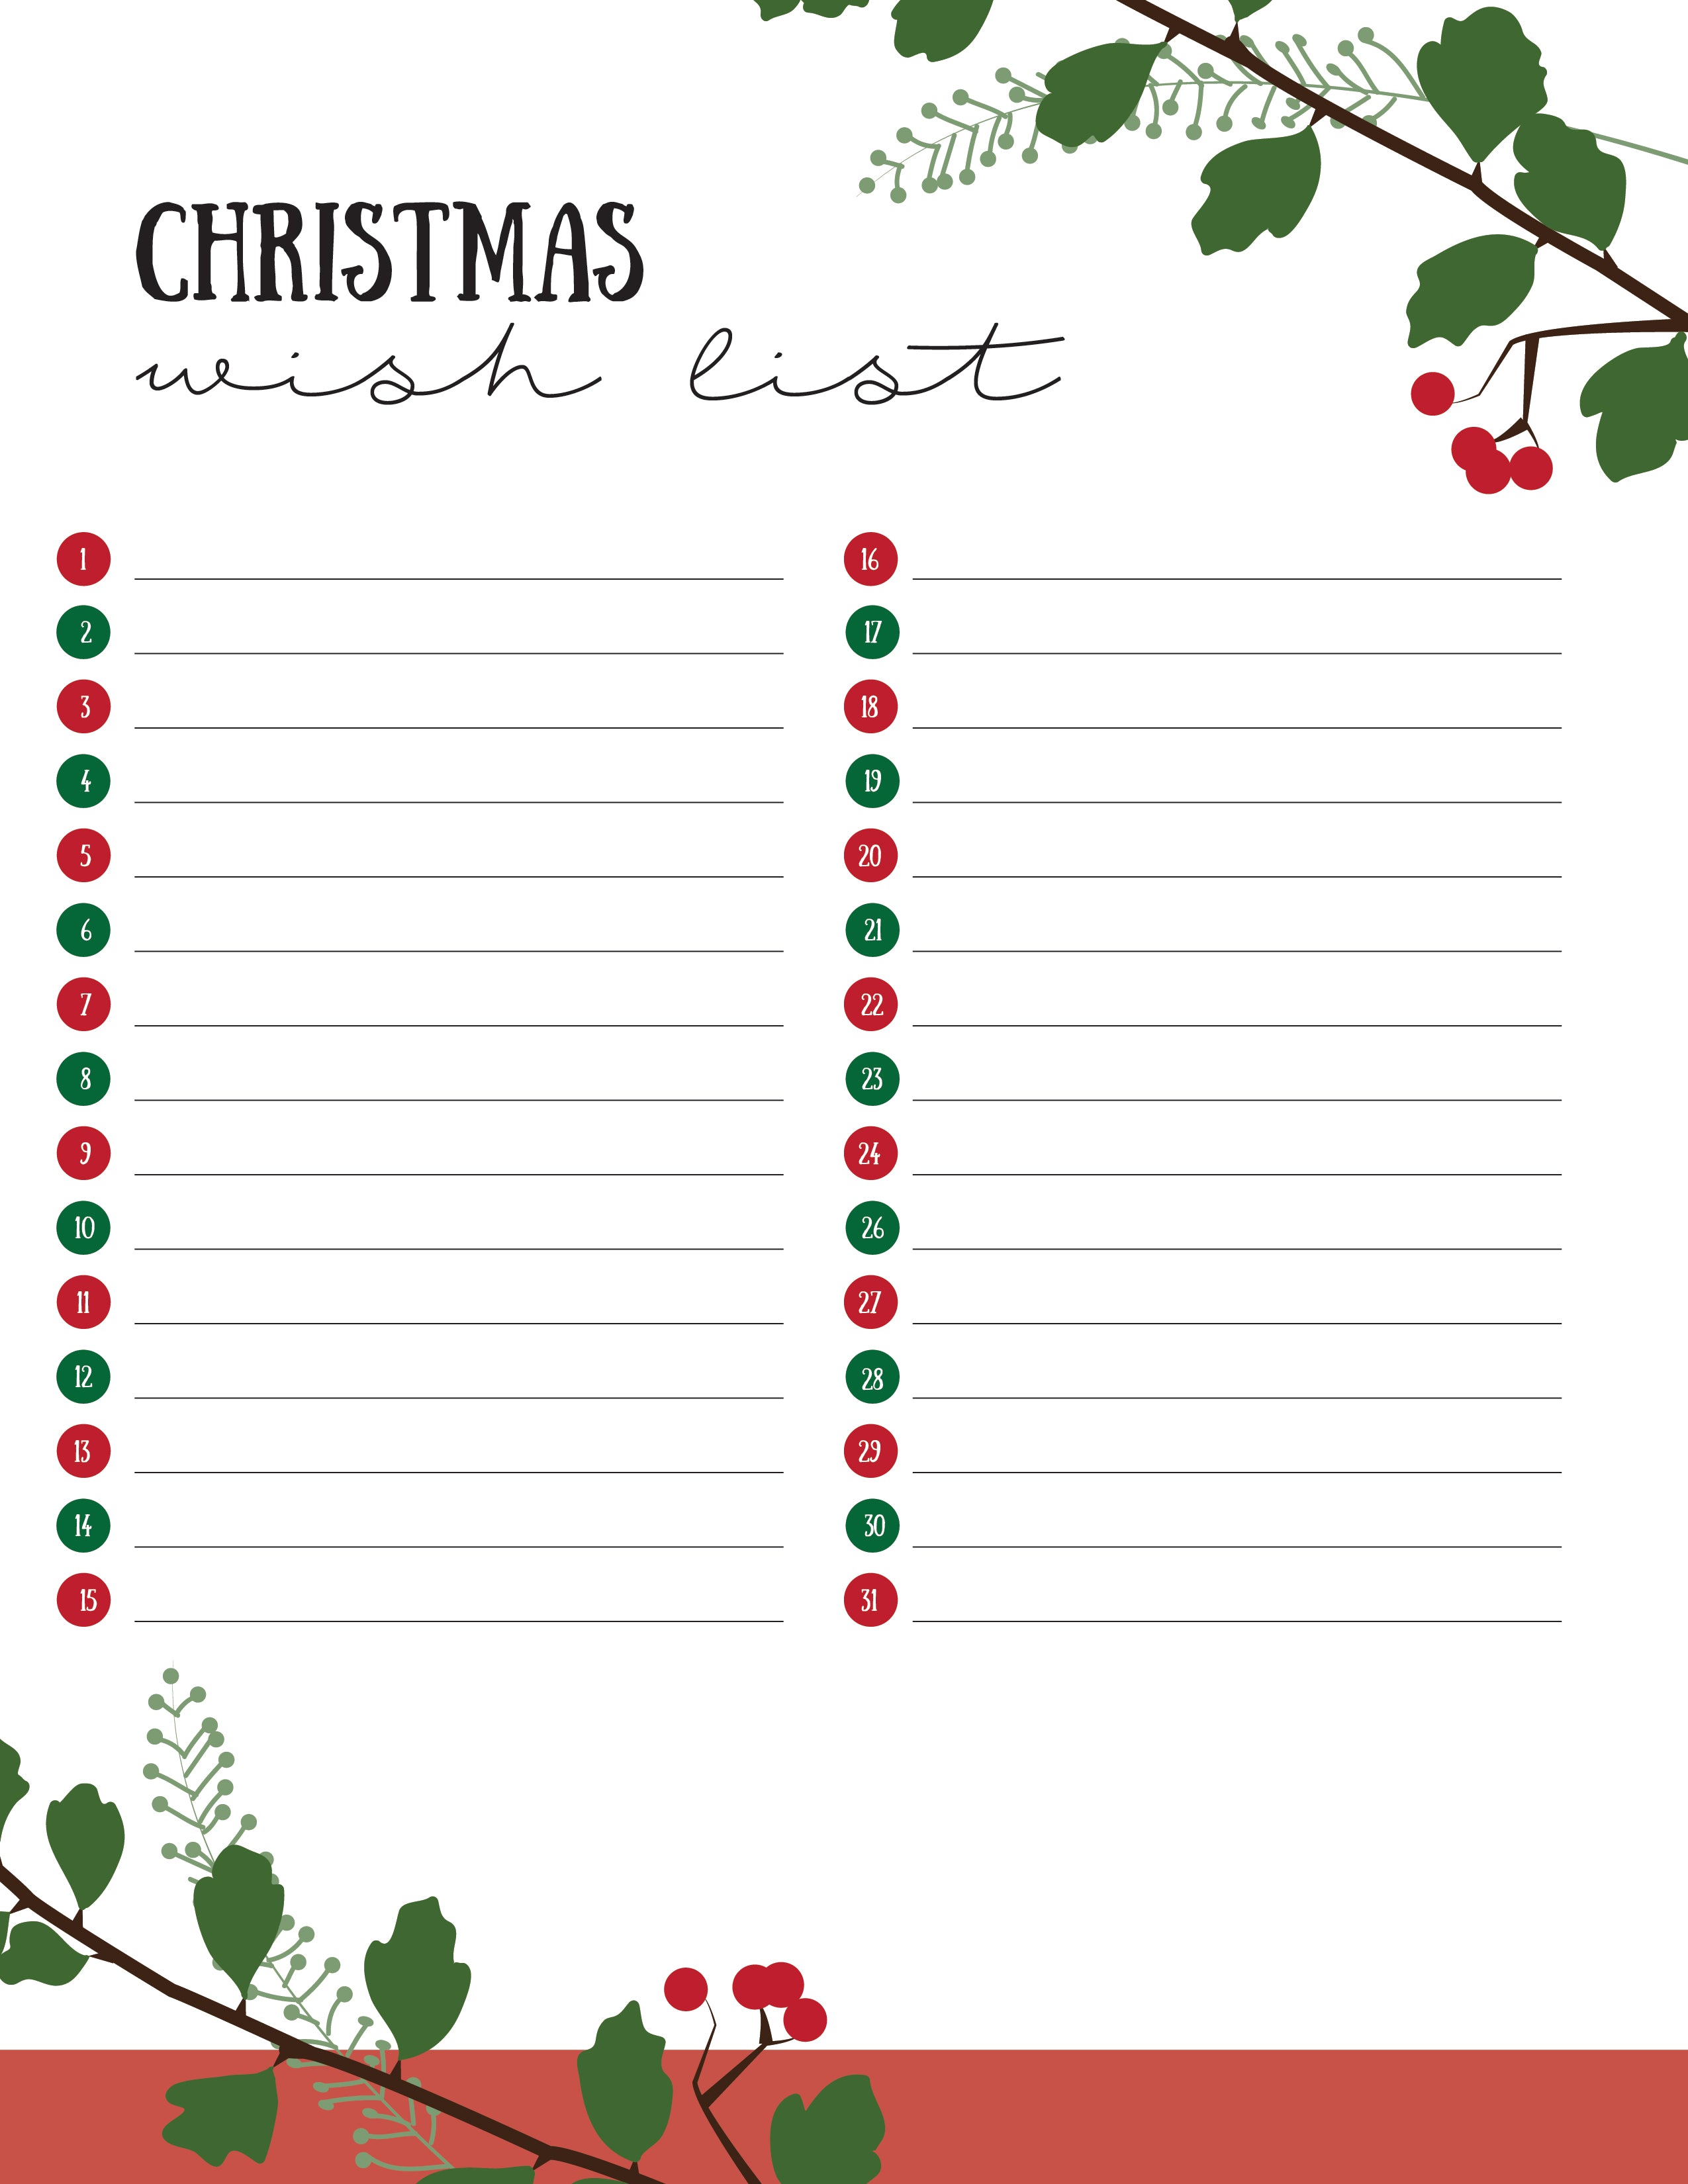 cute-christmas-list-template-template-for-christmas-to-do-list-royalty-free-vector-image